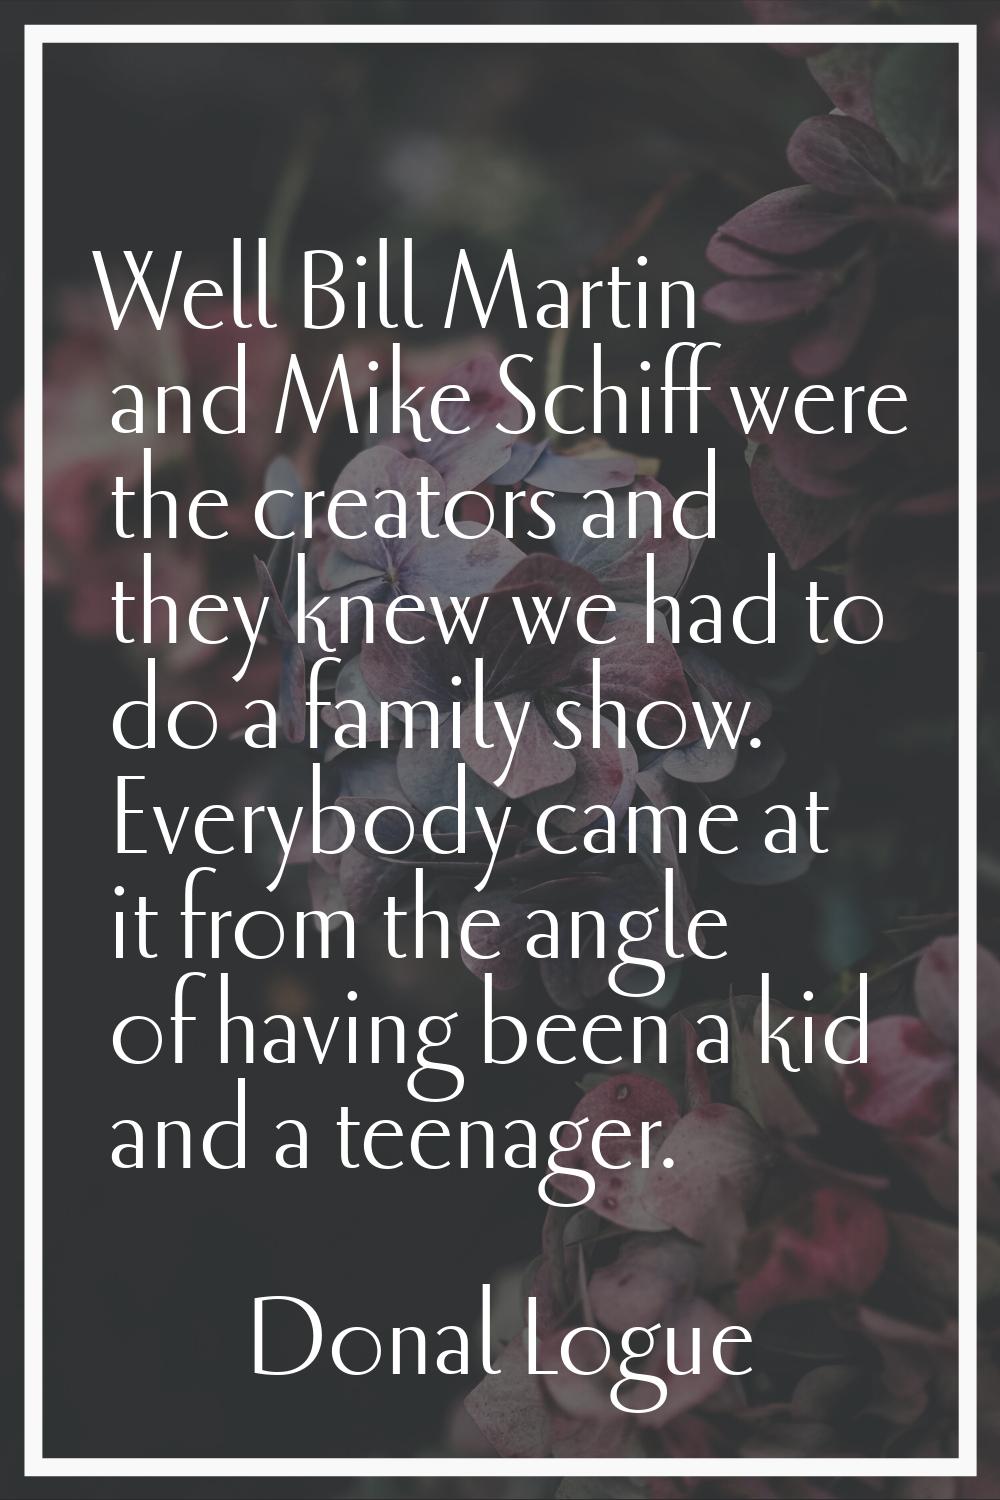 Well Bill Martin and Mike Schiff were the creators and they knew we had to do a family show. Everyb